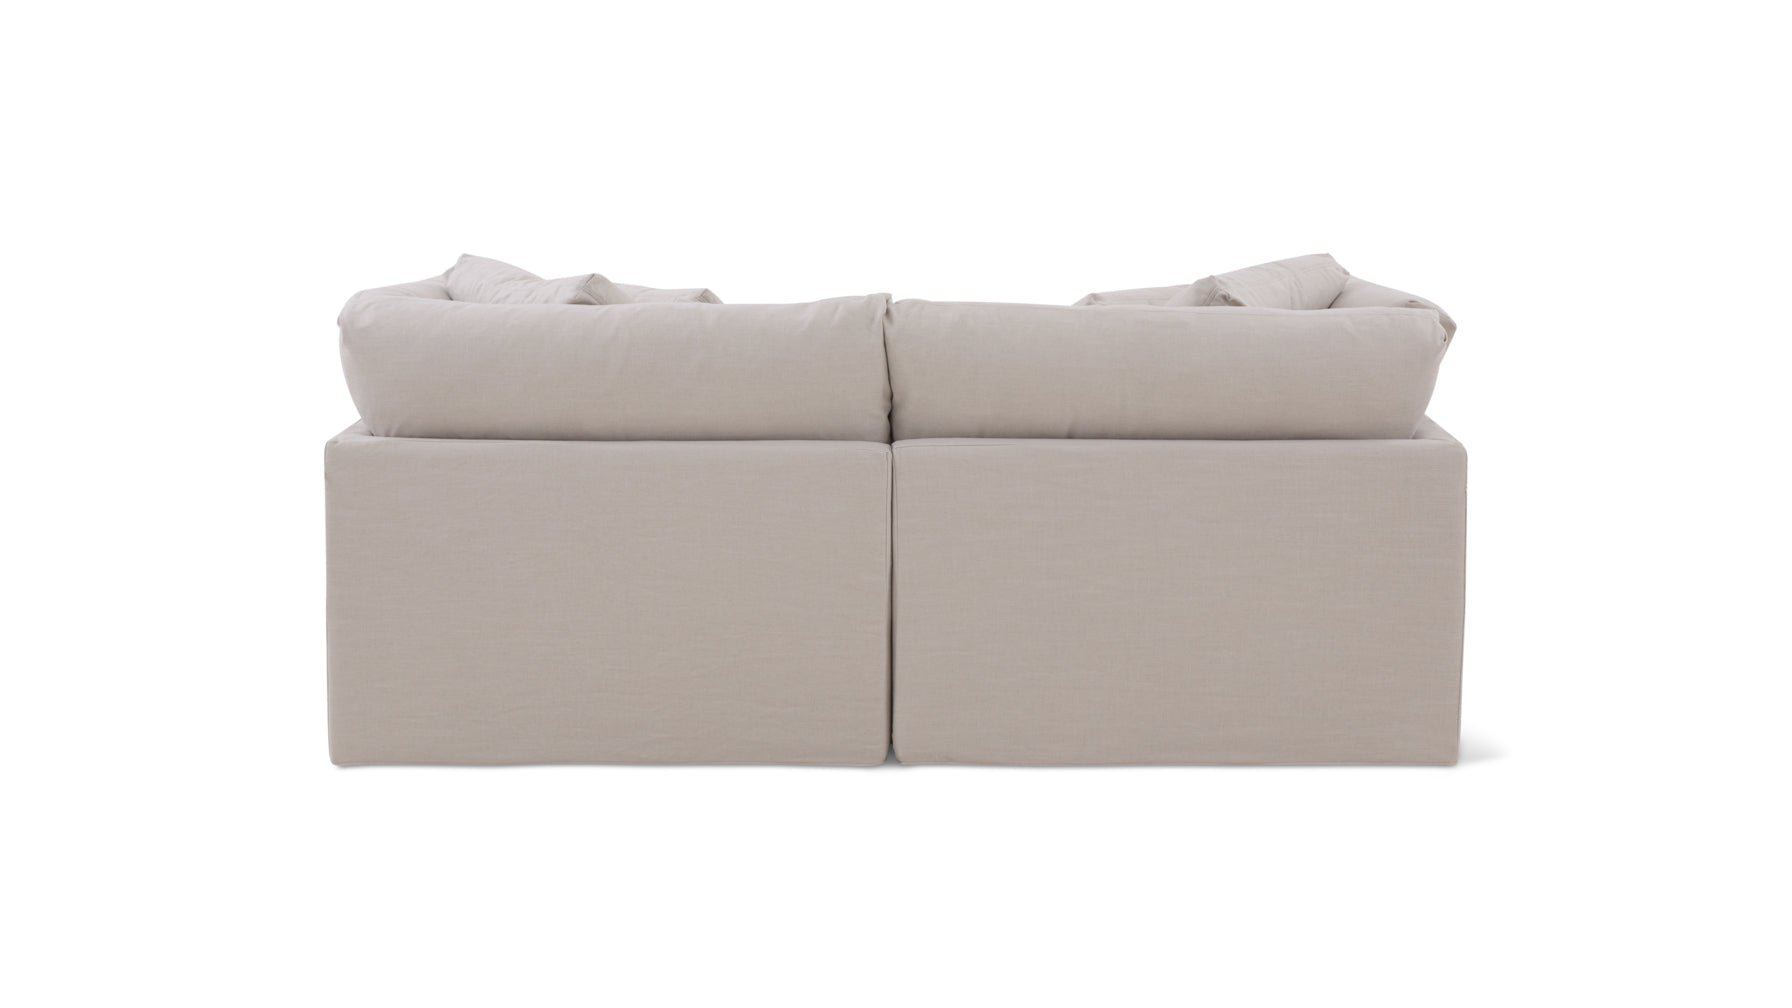 Get Together™ 3-Piece Modular Sectional, Large, Clay - Image 7